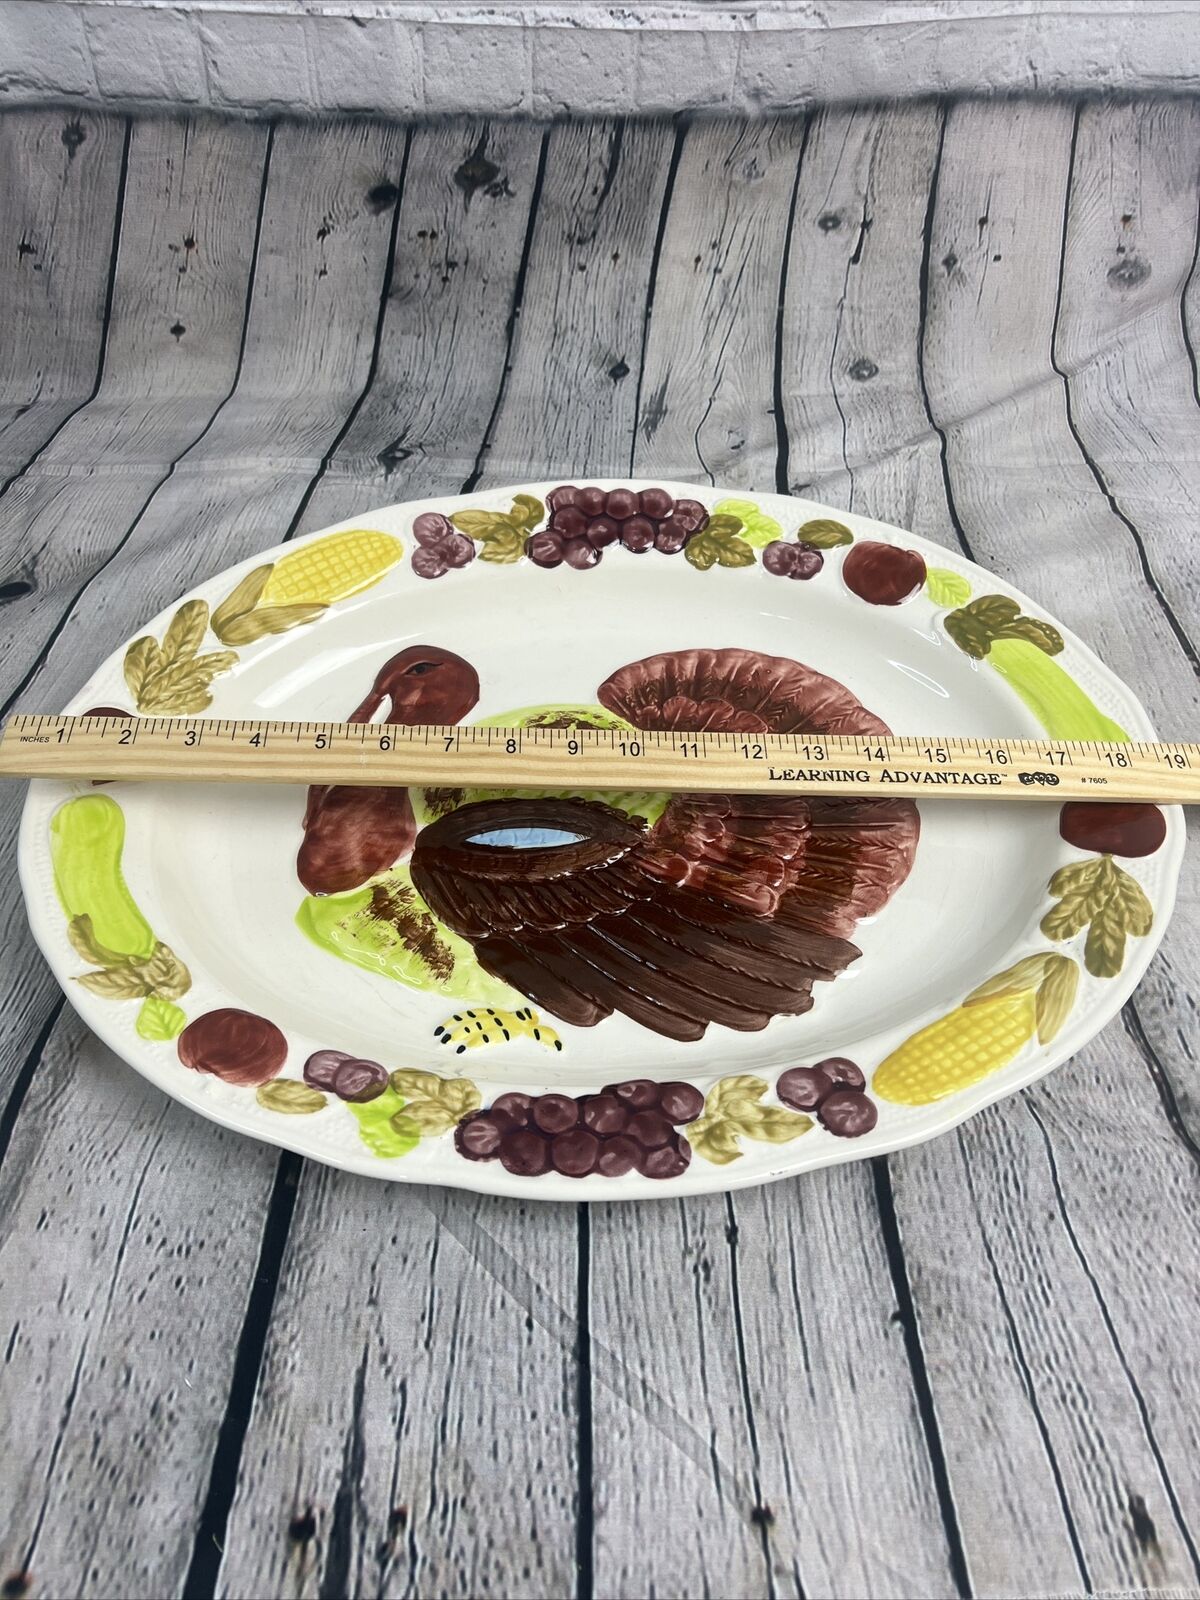 Vintage Extra Large Turkey Platter Hand Painted  18x14 Oval Thanksgiving Platter